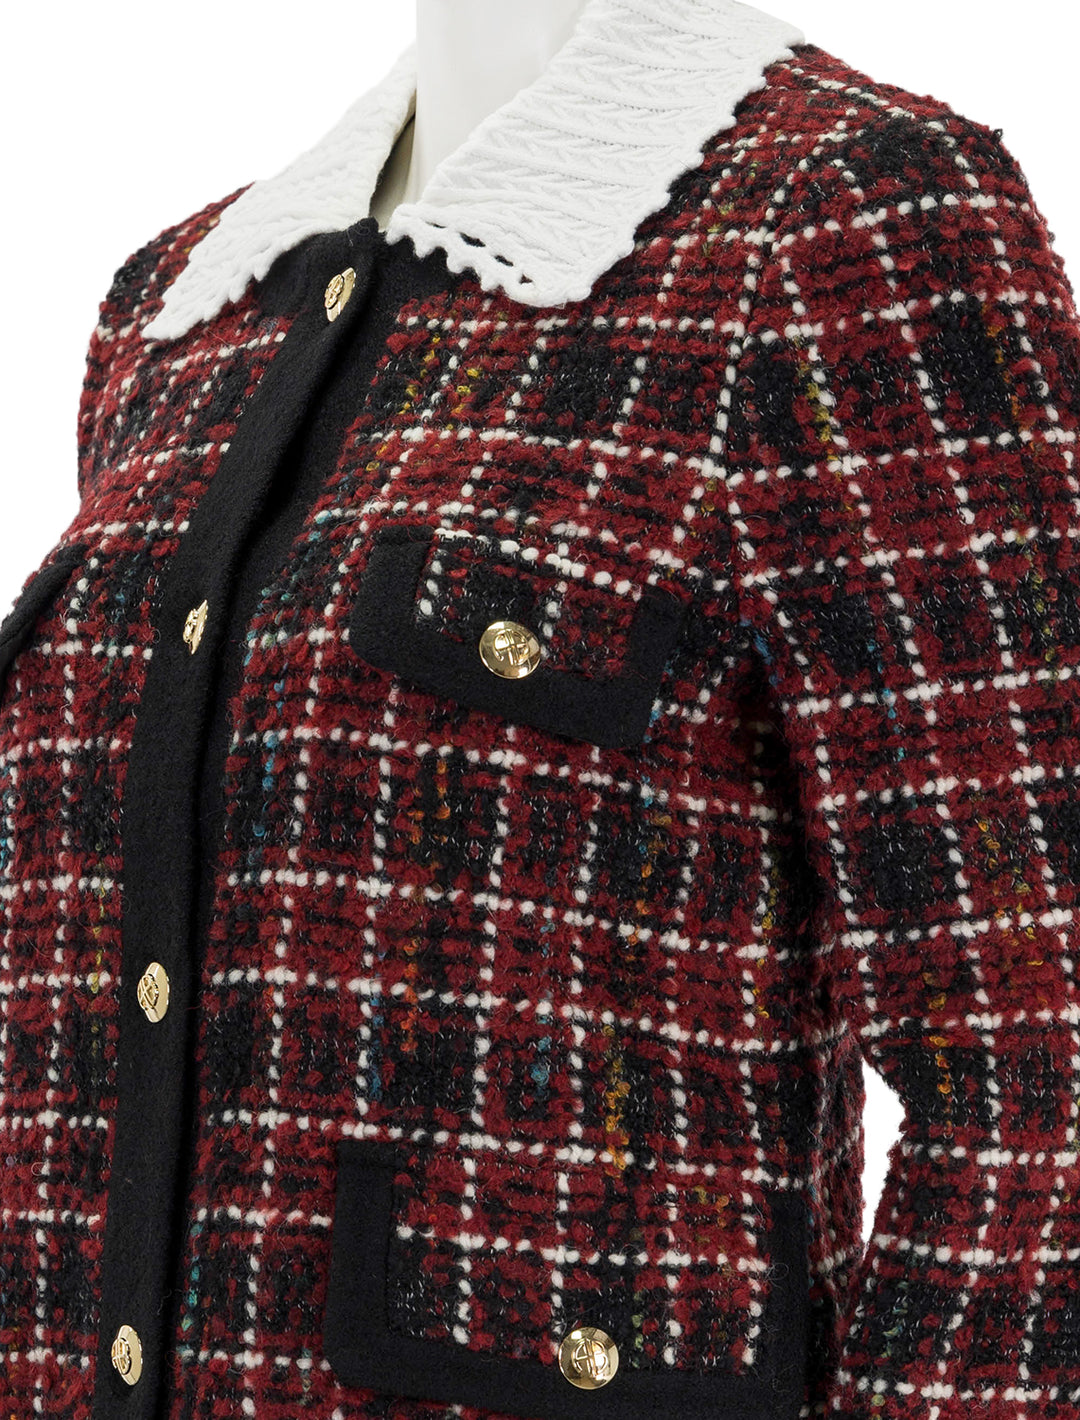 Close-up view of Anine Bing's lydia jacket in cherry plaid.